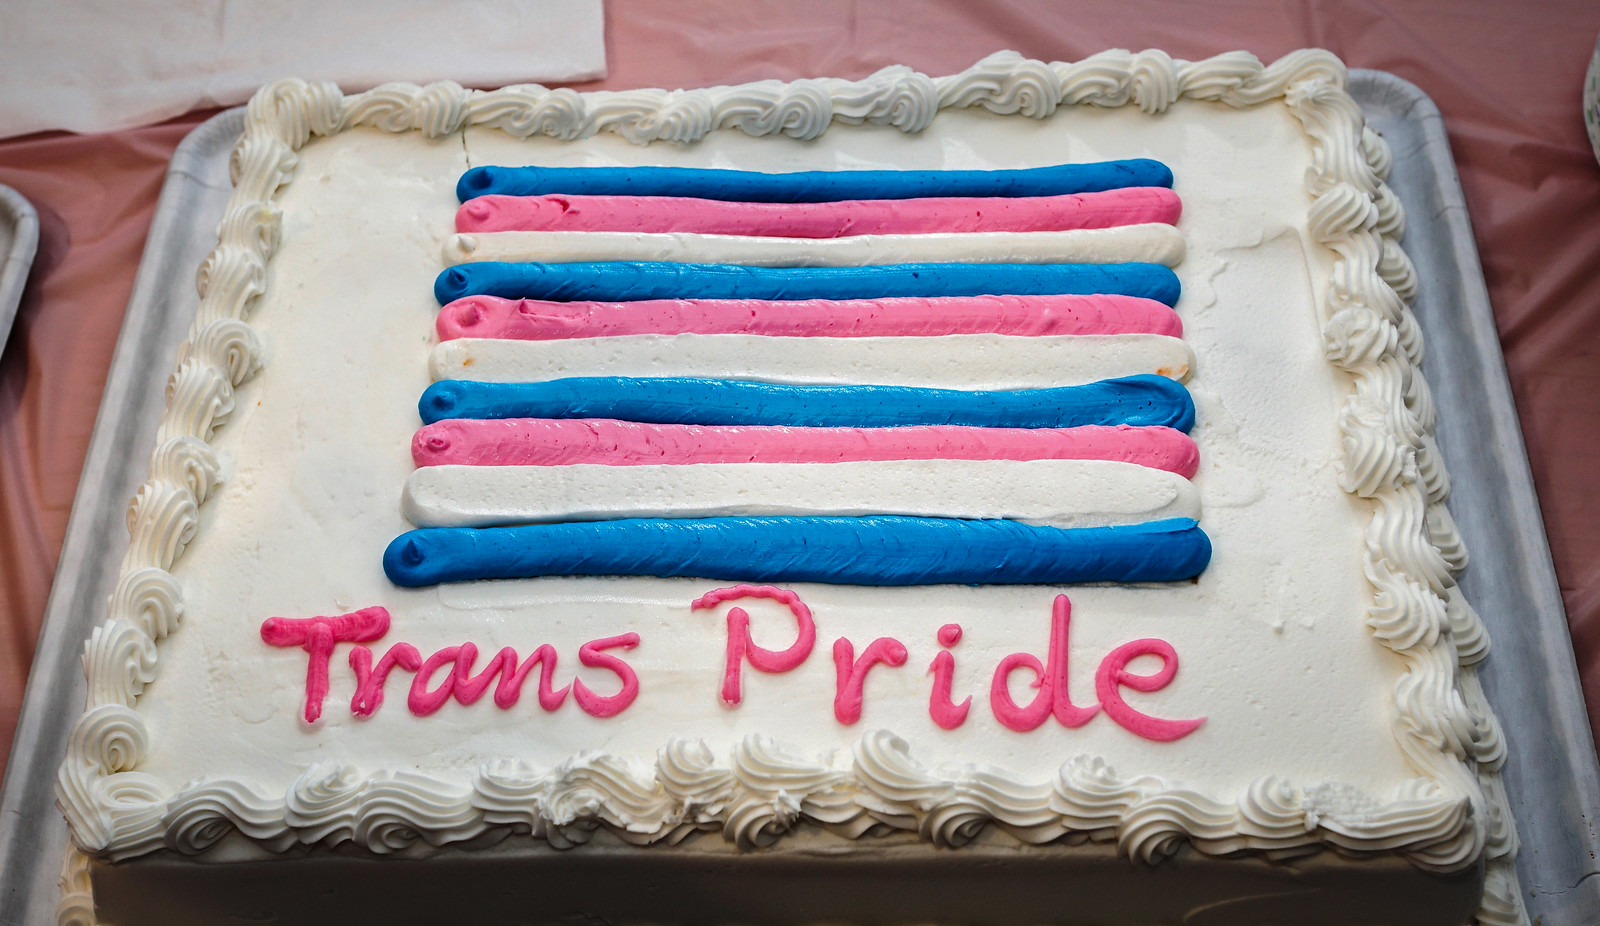 Thanks for publishing my Transgender Person Pride cake photo, New York Times